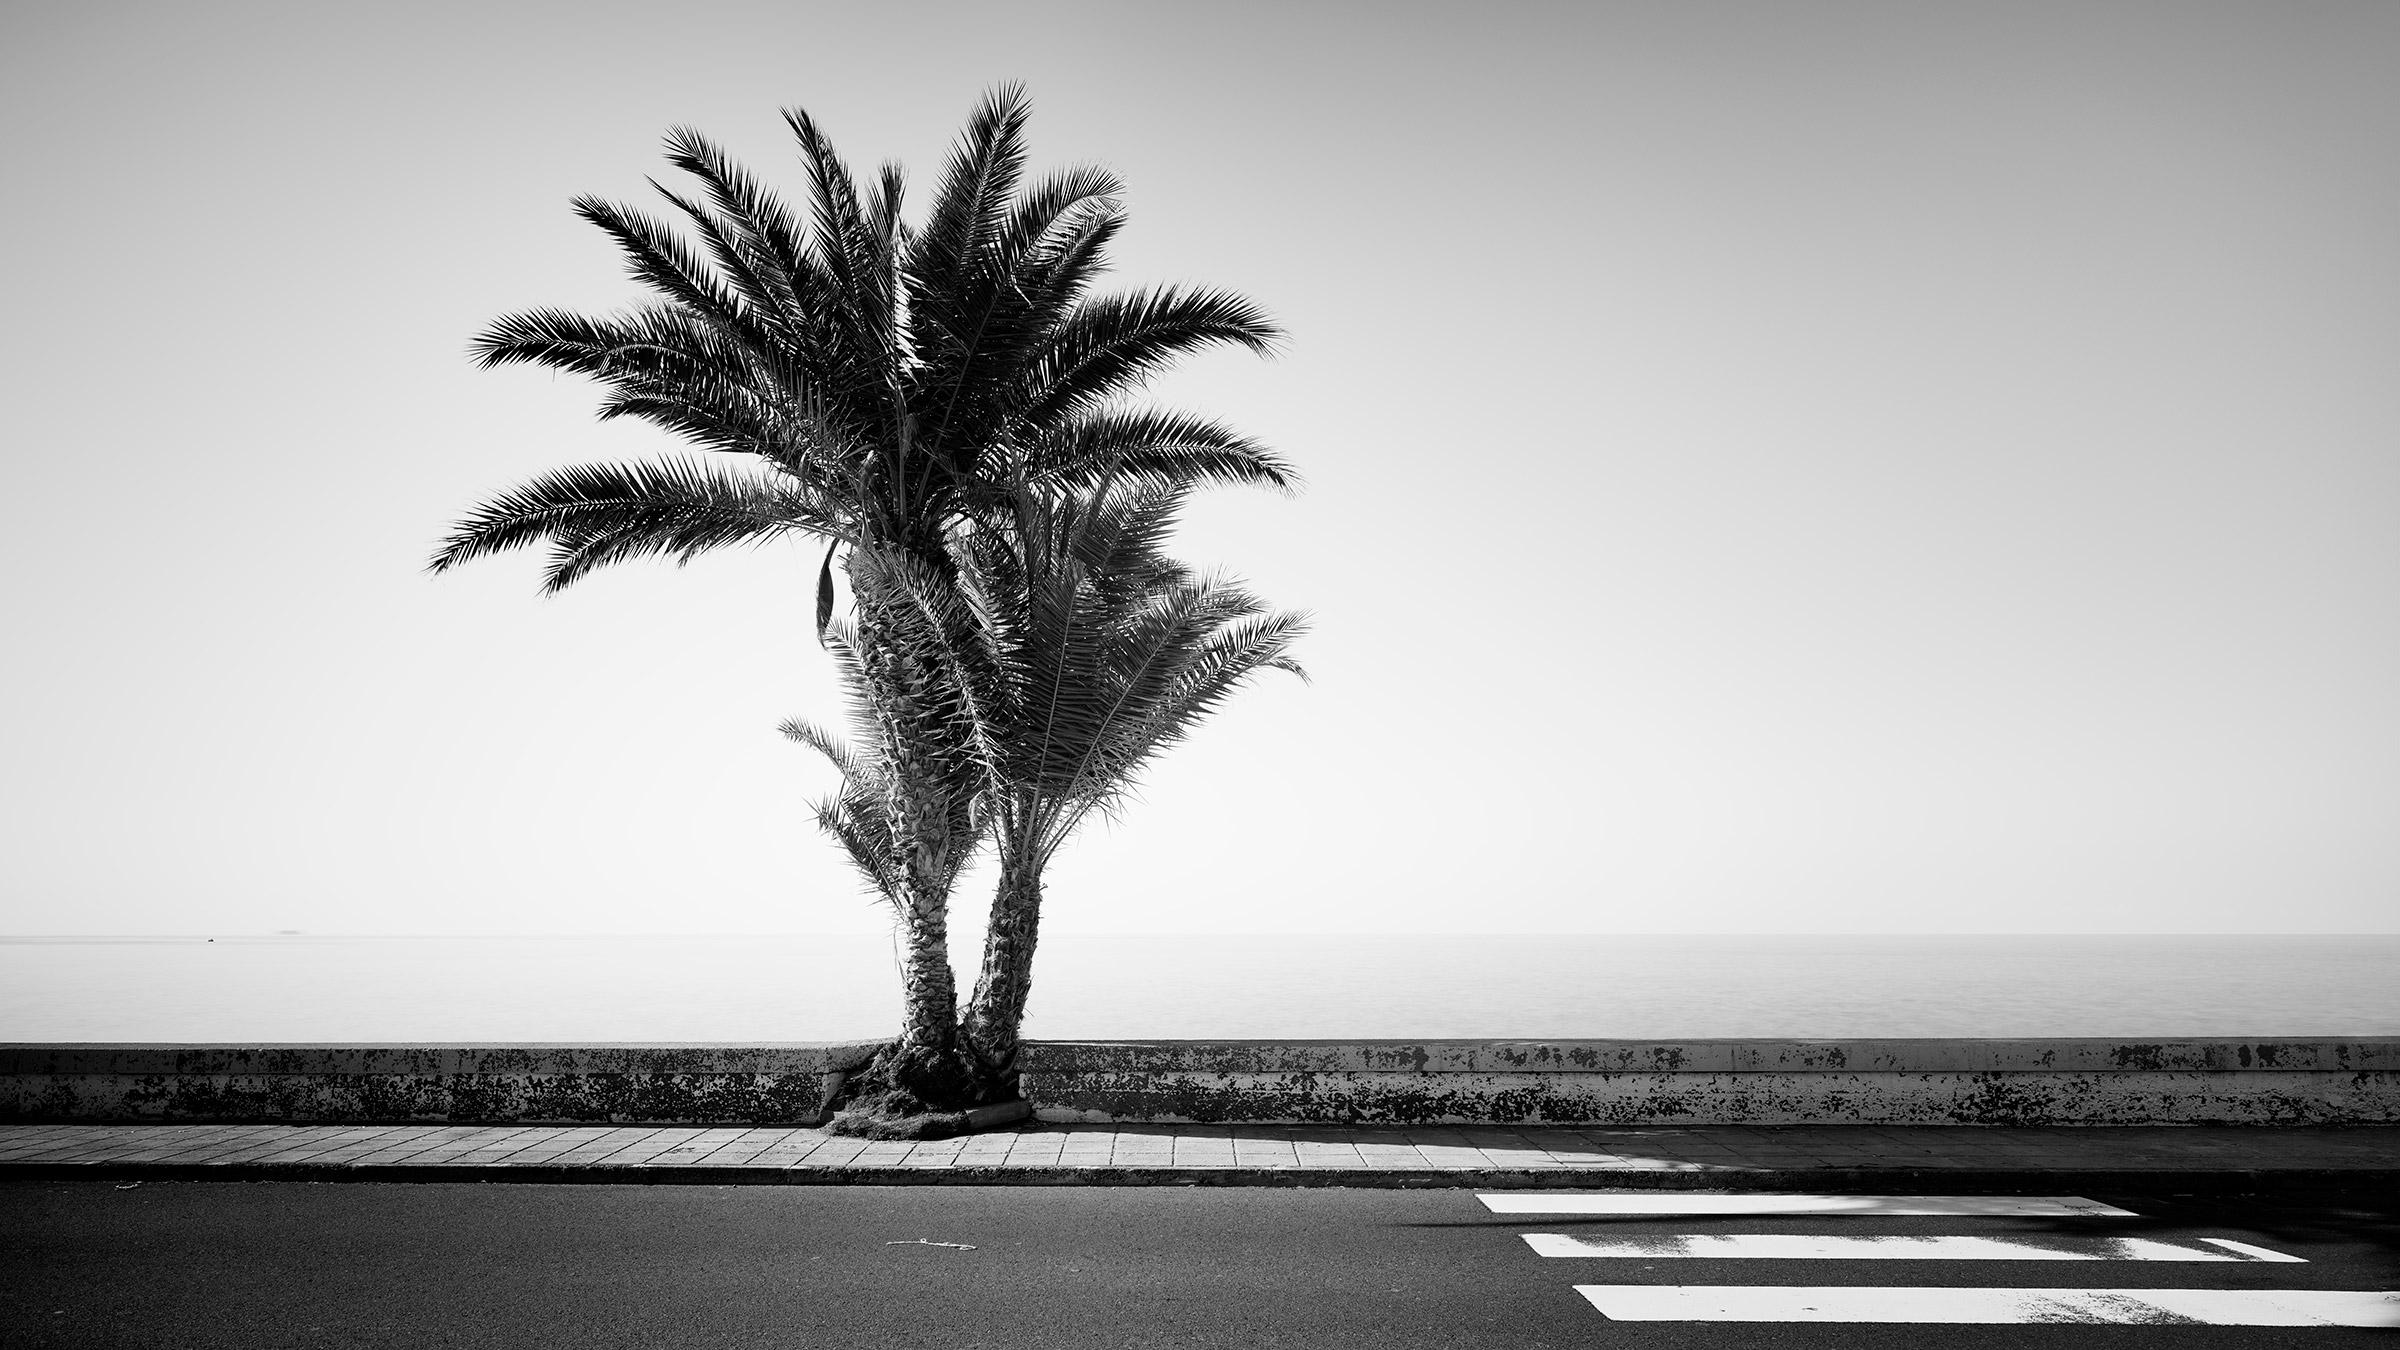 Gerald Berghammer Landscape Photograph - Palm Trees on the roadside, Portugal, Black and white photography, landscape